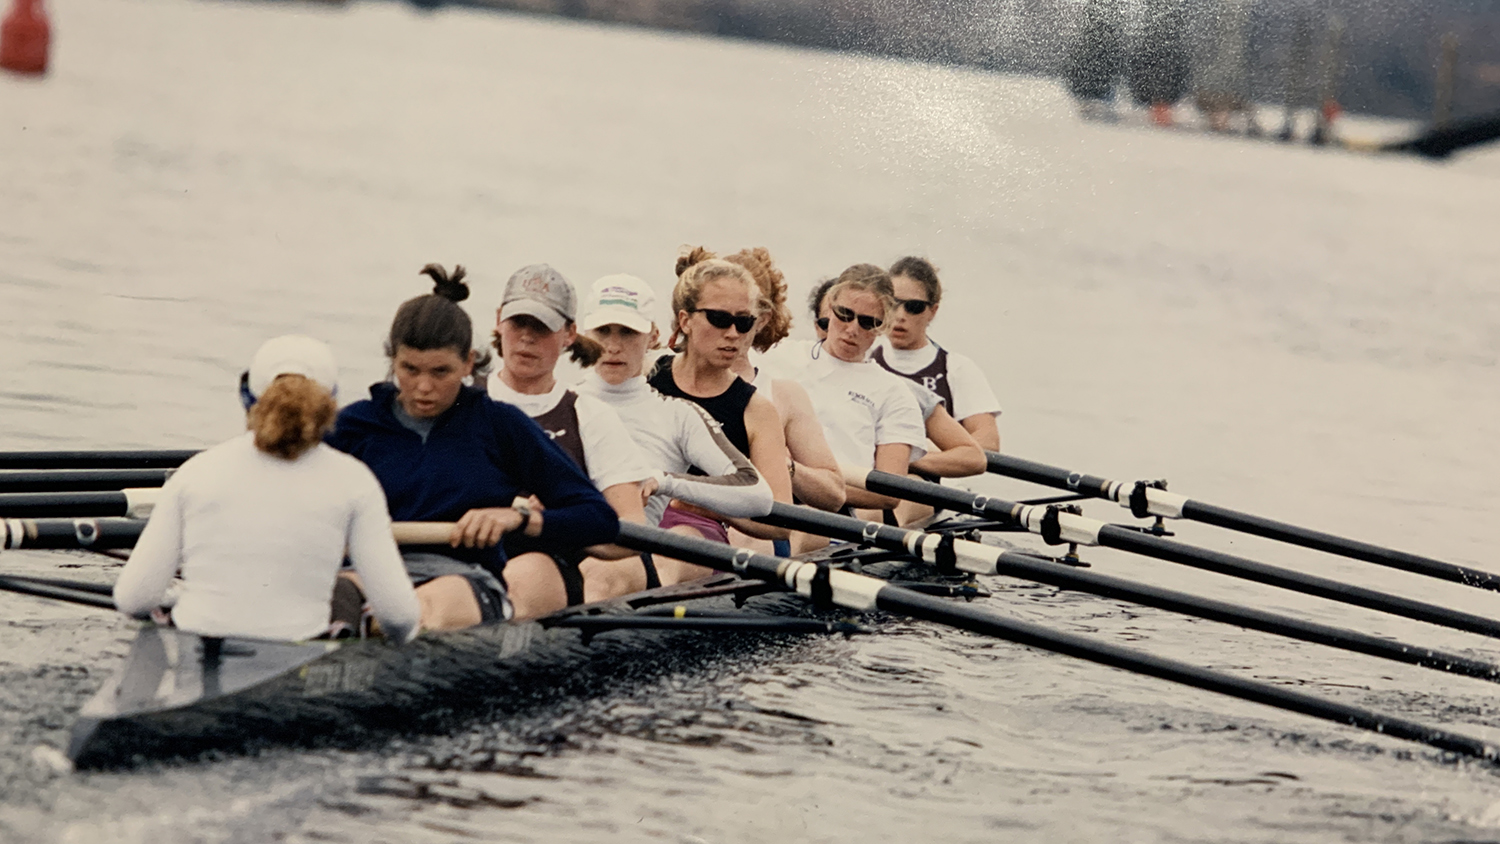 As the coxswain, Saul sits facing her team to guide them through the race.